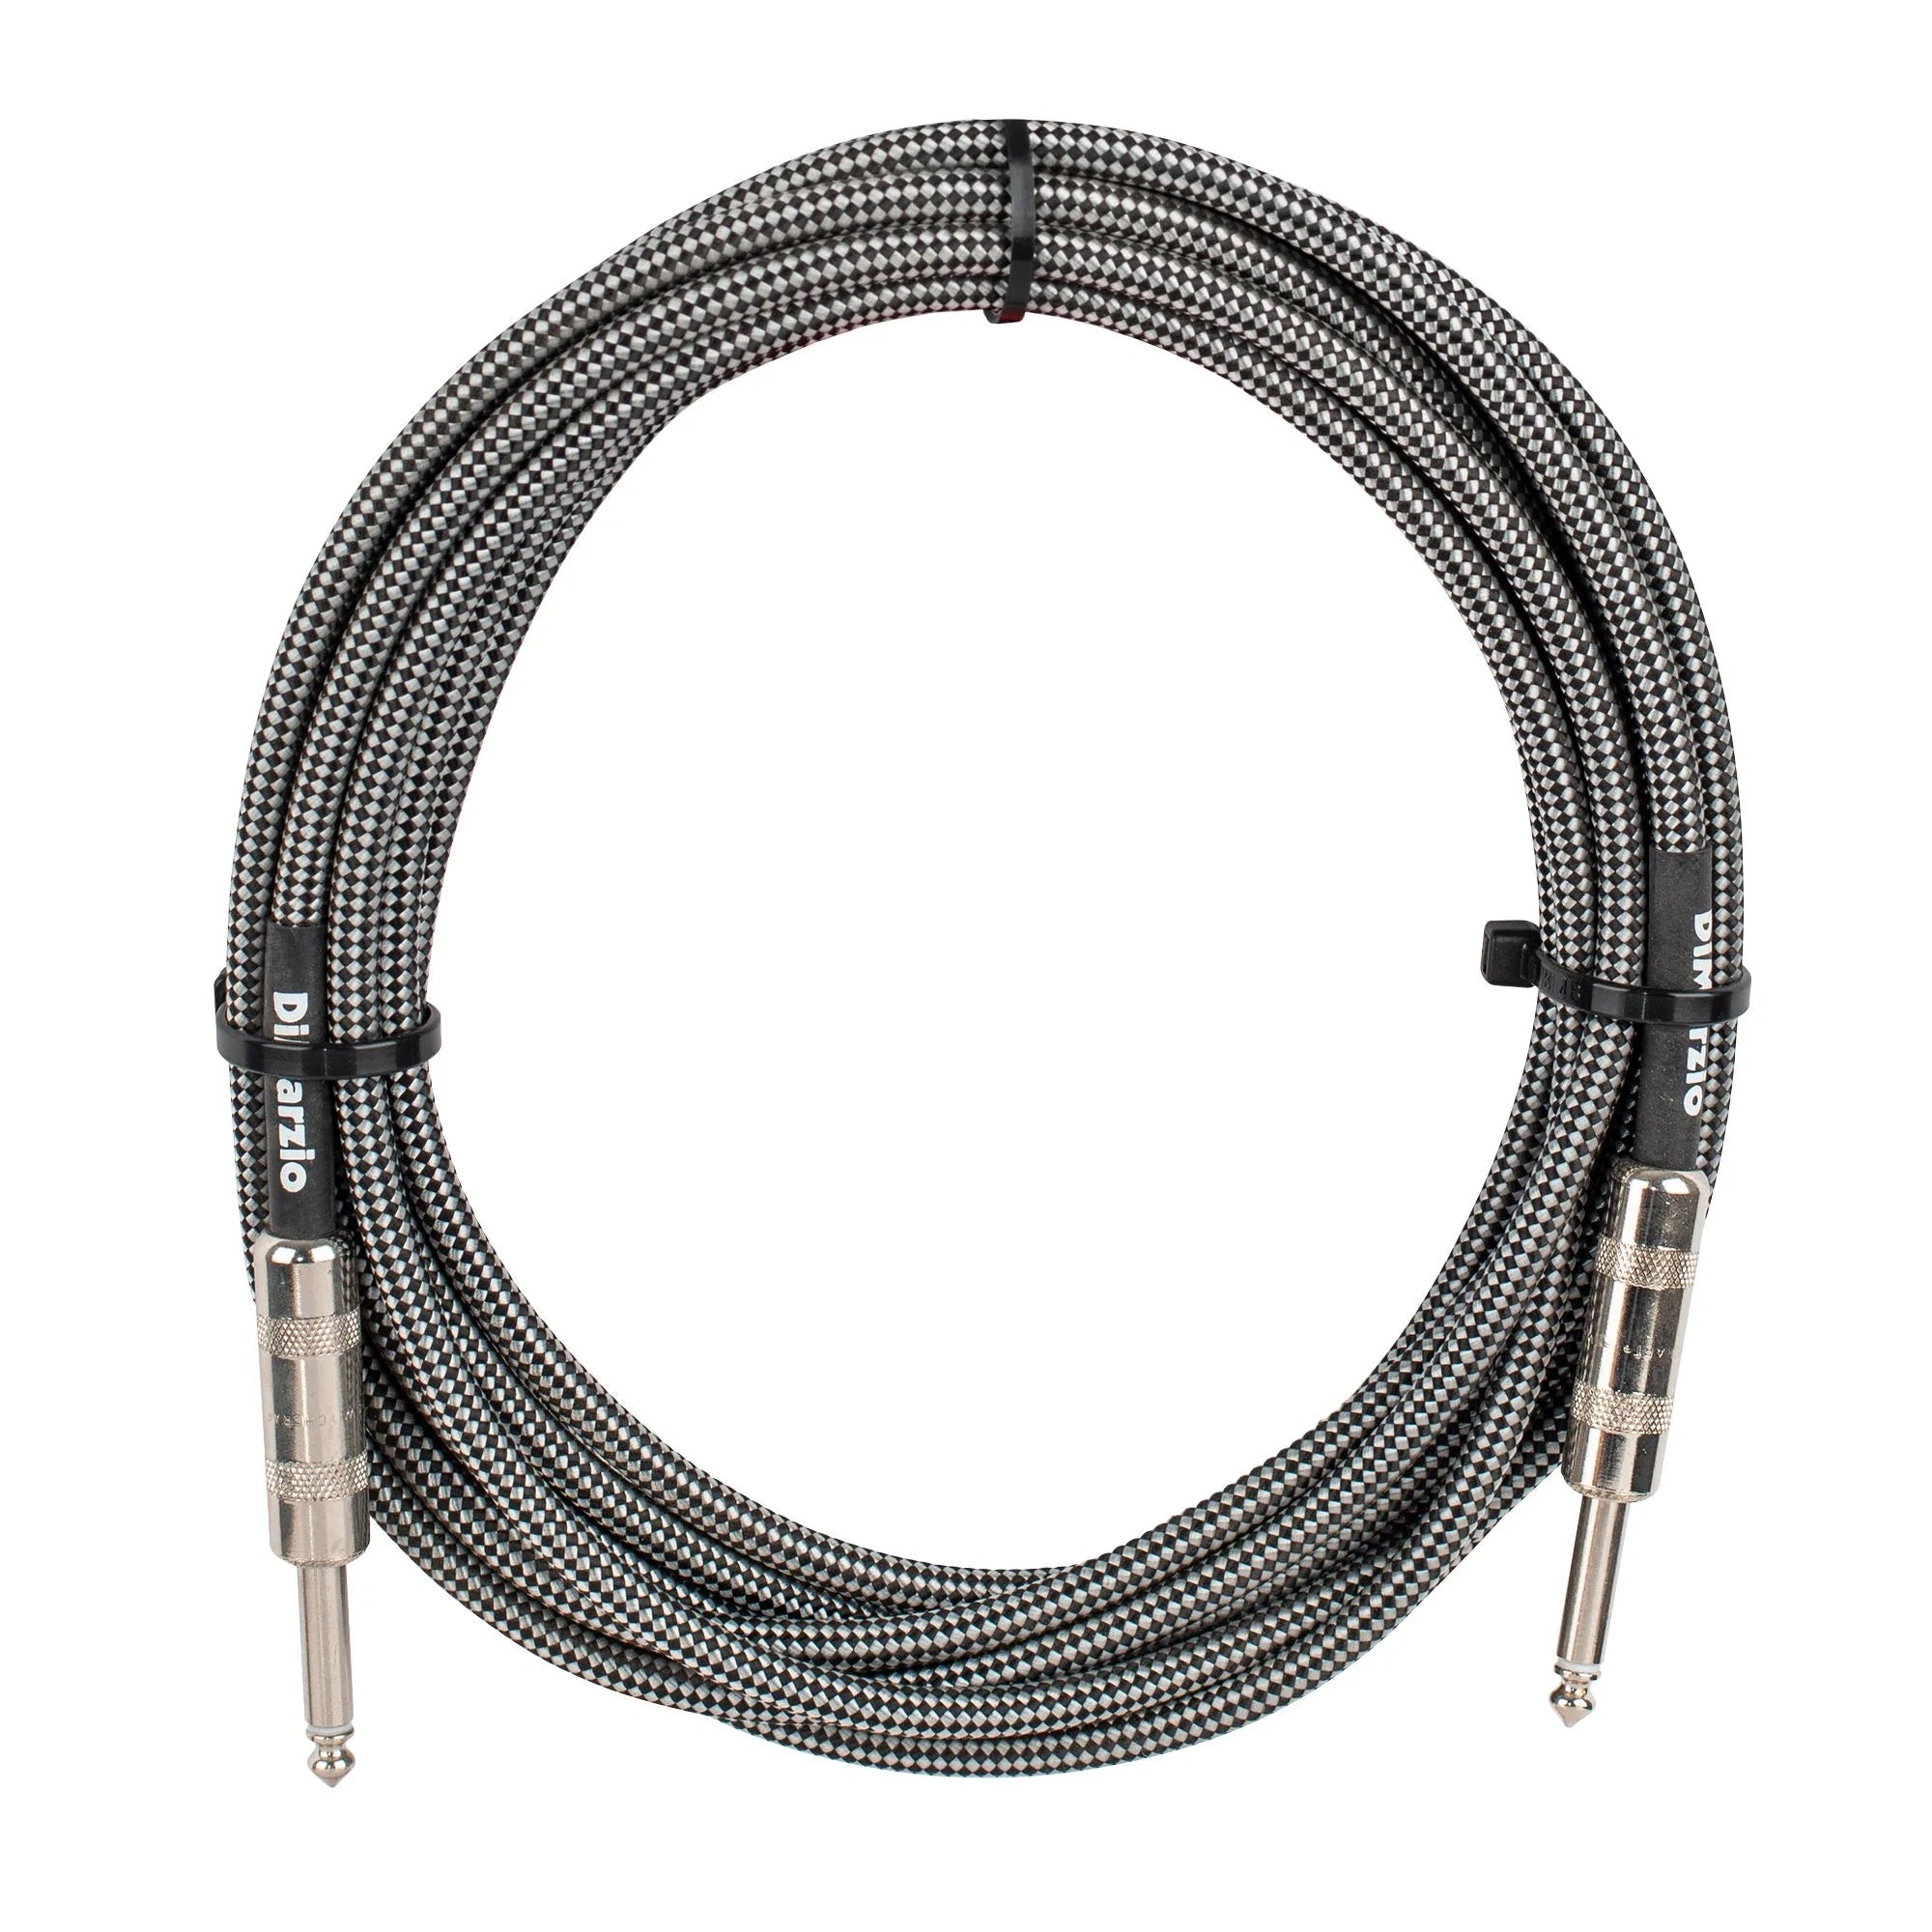 Dimarzio 18Ft Pro Guitar Cable - Straight To Straight Black & Grey